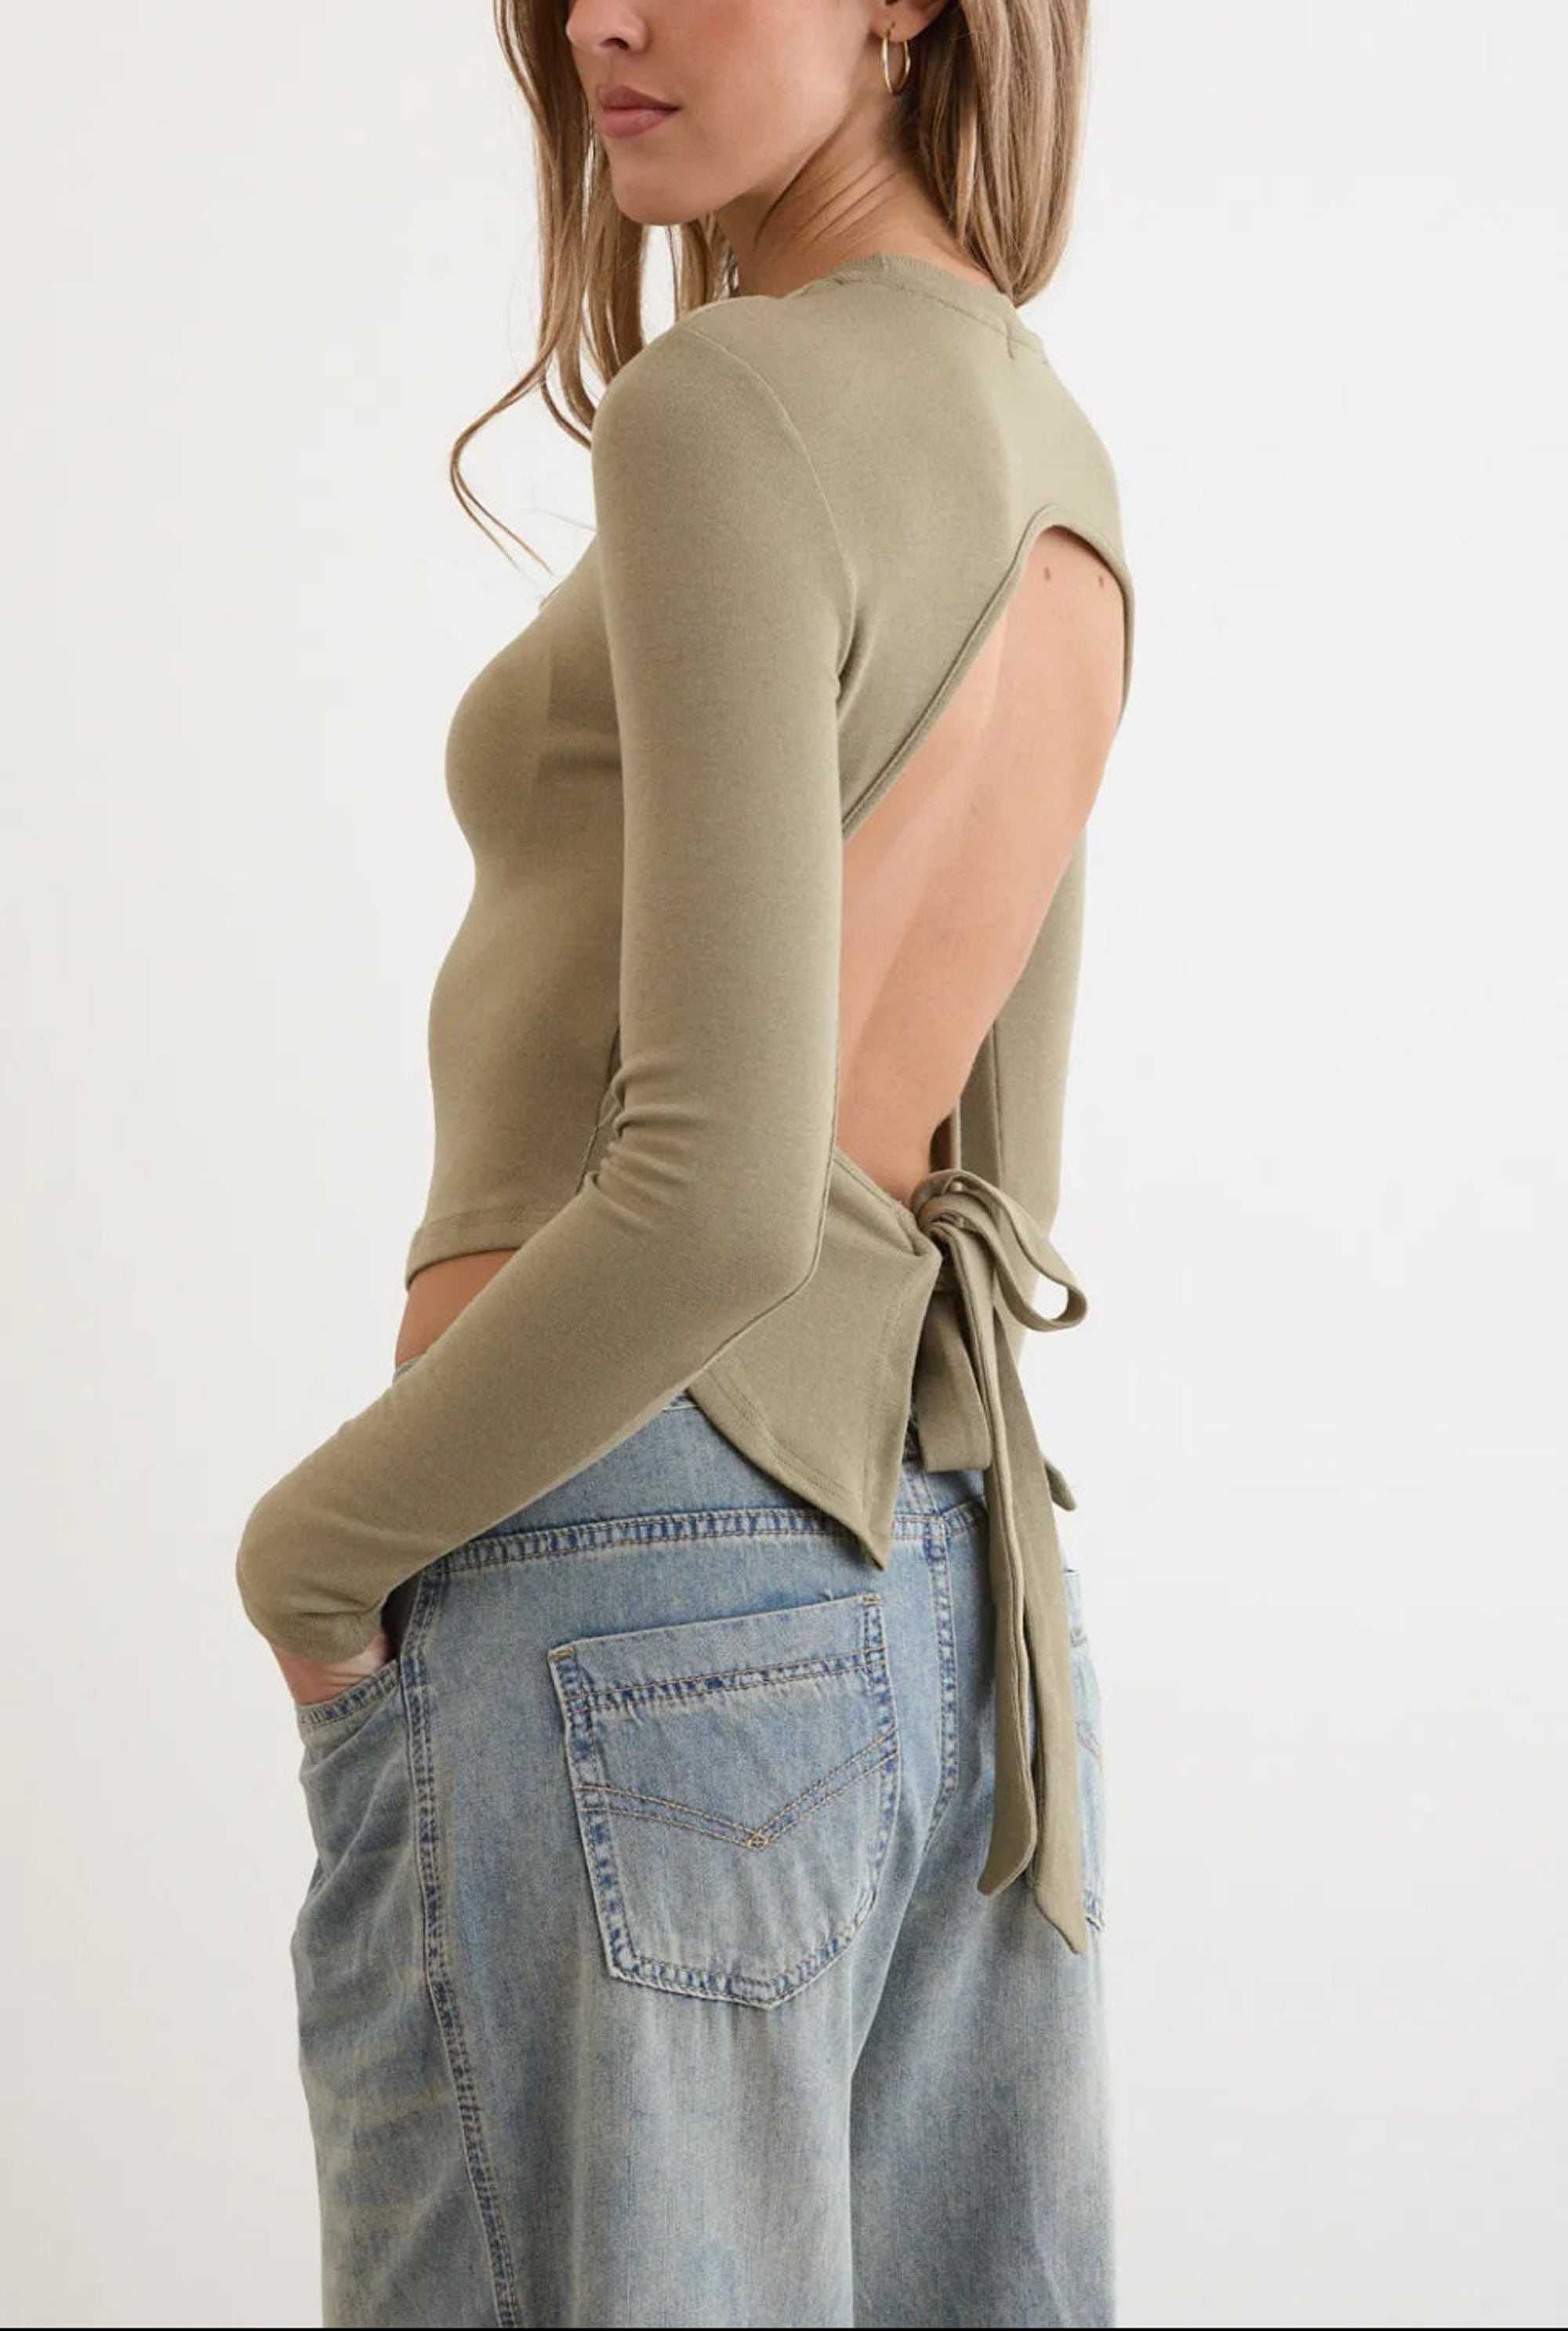 Clever Alice Backless Long-Sleeve in Sage 